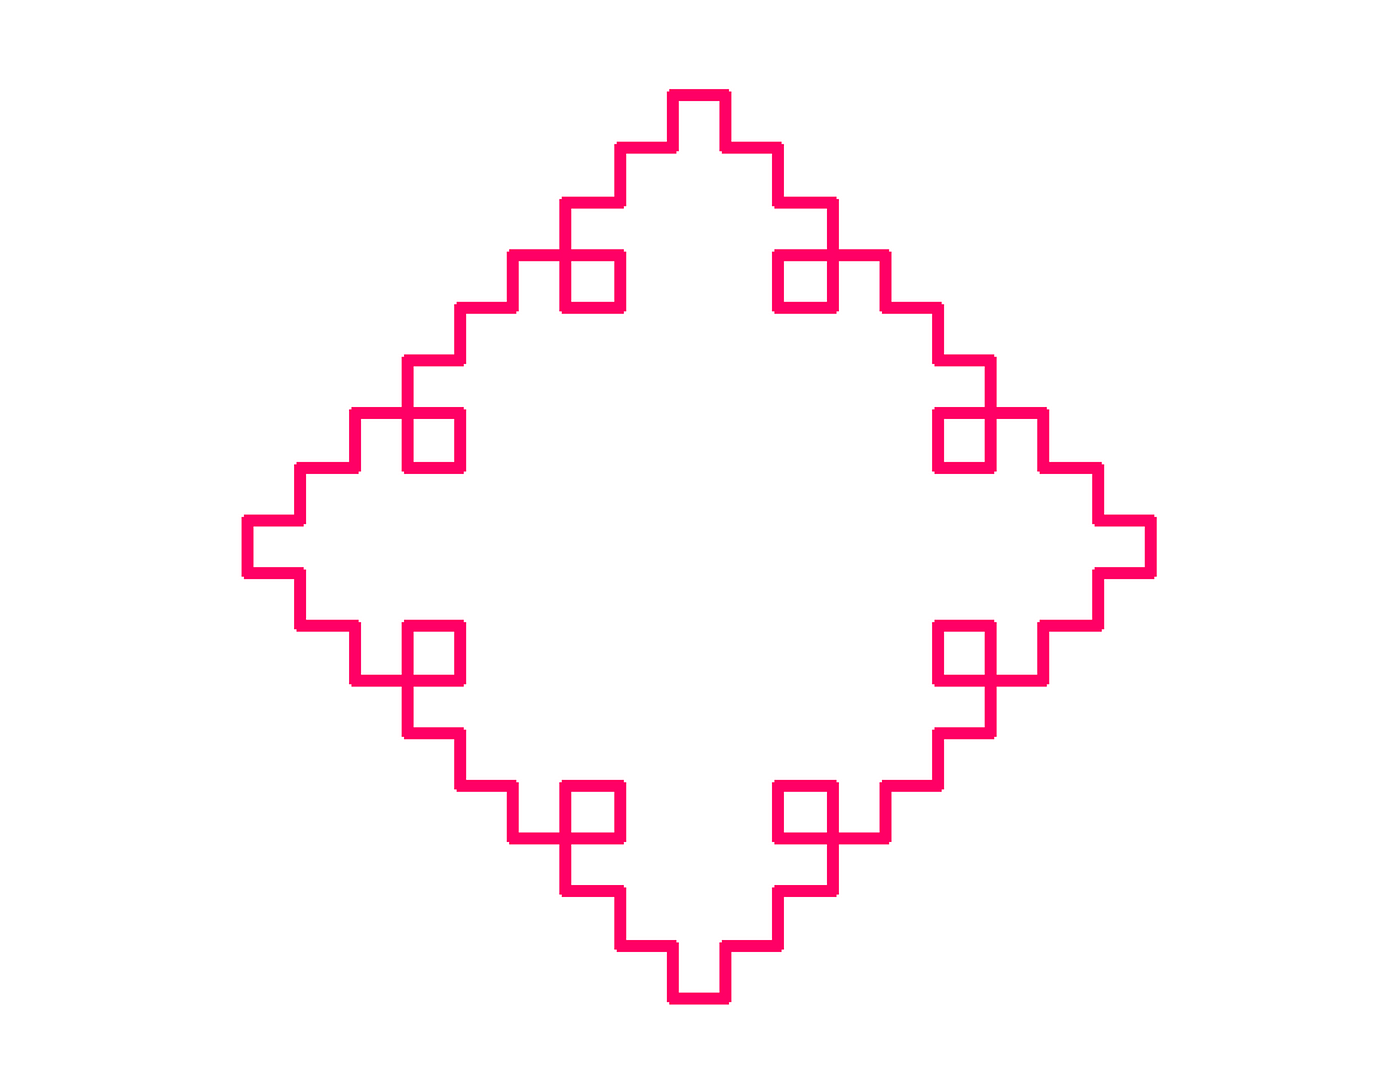 Infinite Regress: How To Really Understand It? — The same logic from before is applied once more to iteration 1 of the cross-stitch curve. The second iteration of the cross-stitch curve appears like diamond with 8 square holes, 2 touching each of the diamond’s sides.